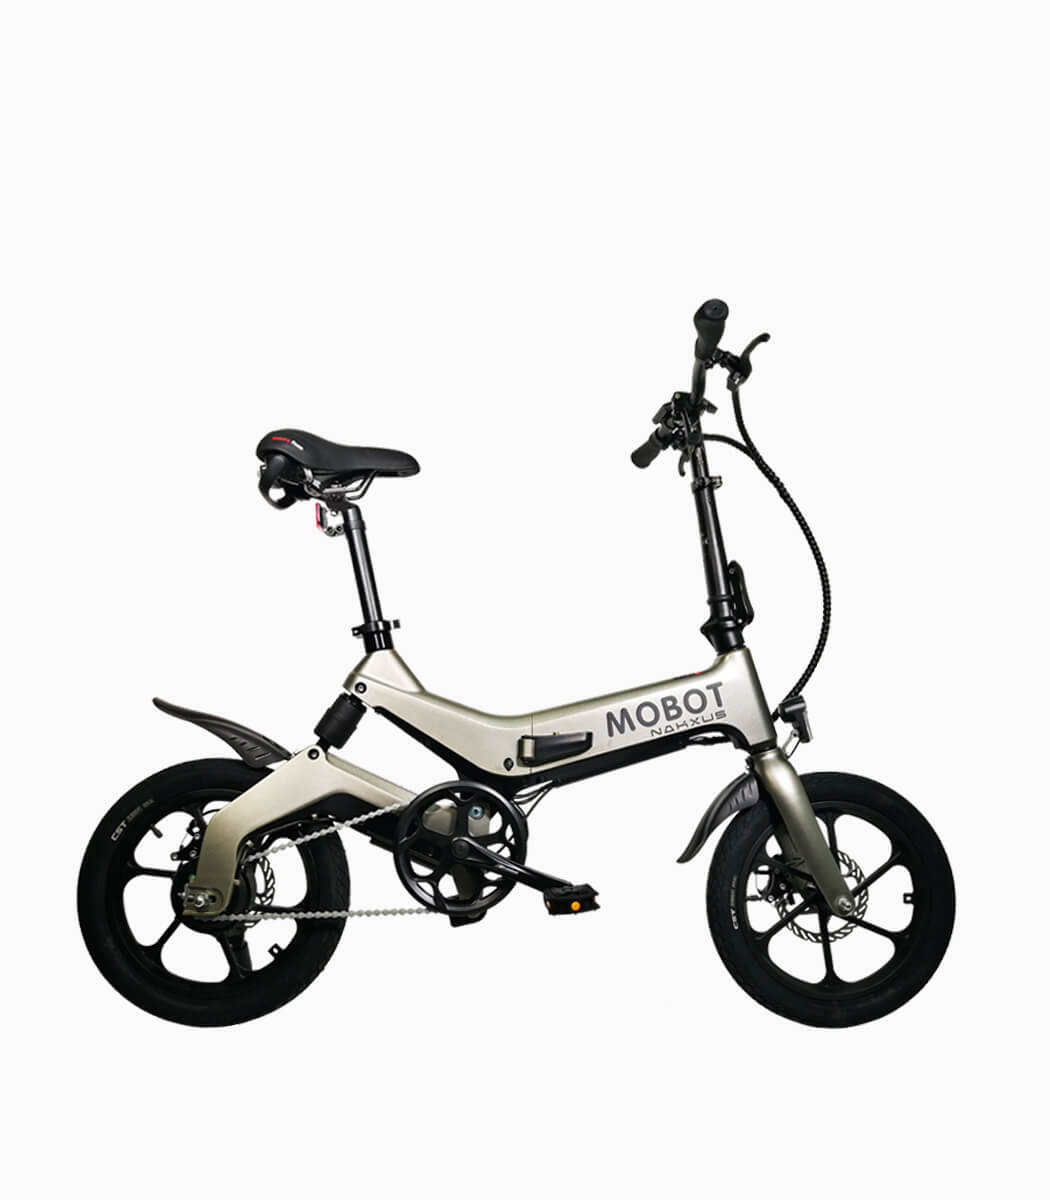 NAKXUS NF1 CHAMPAGNE GOLD BLACK8.7AH LTA approved ebike right - Home